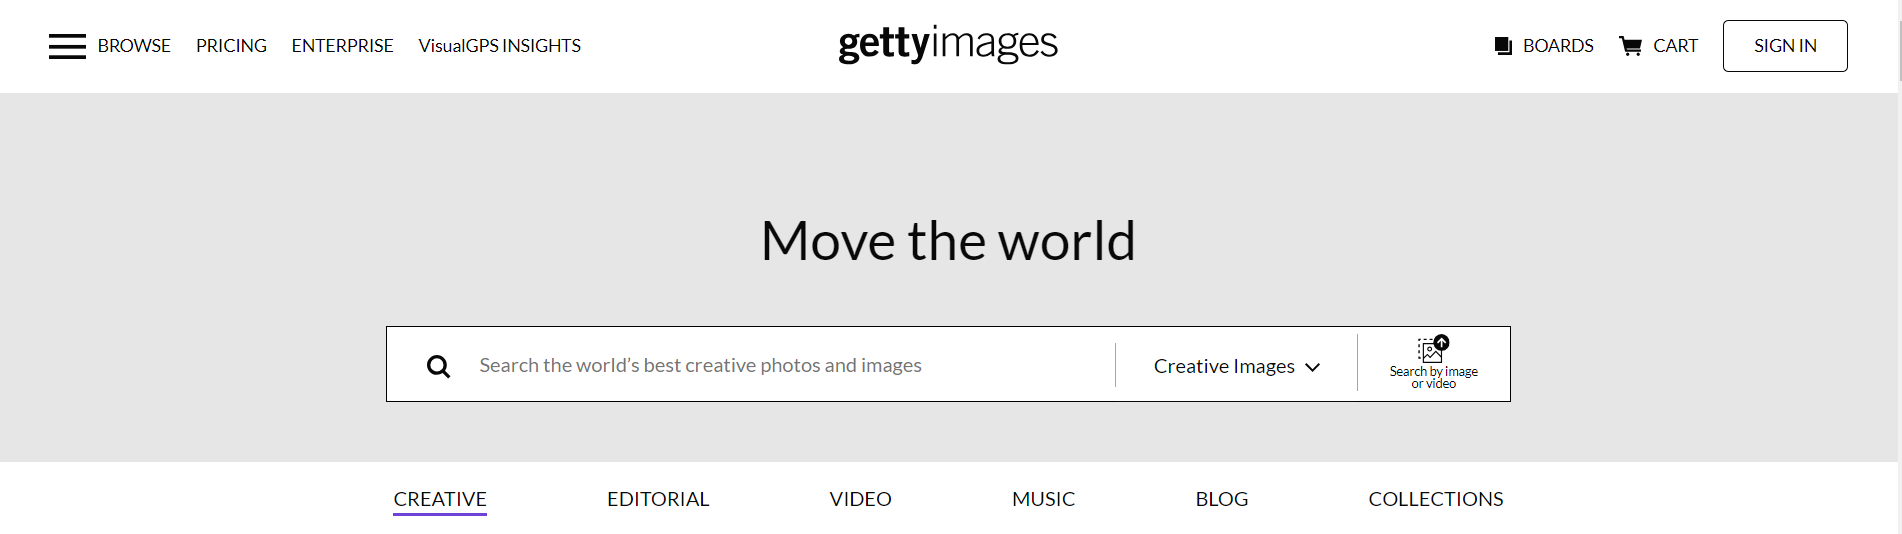 Overview of Getty Images